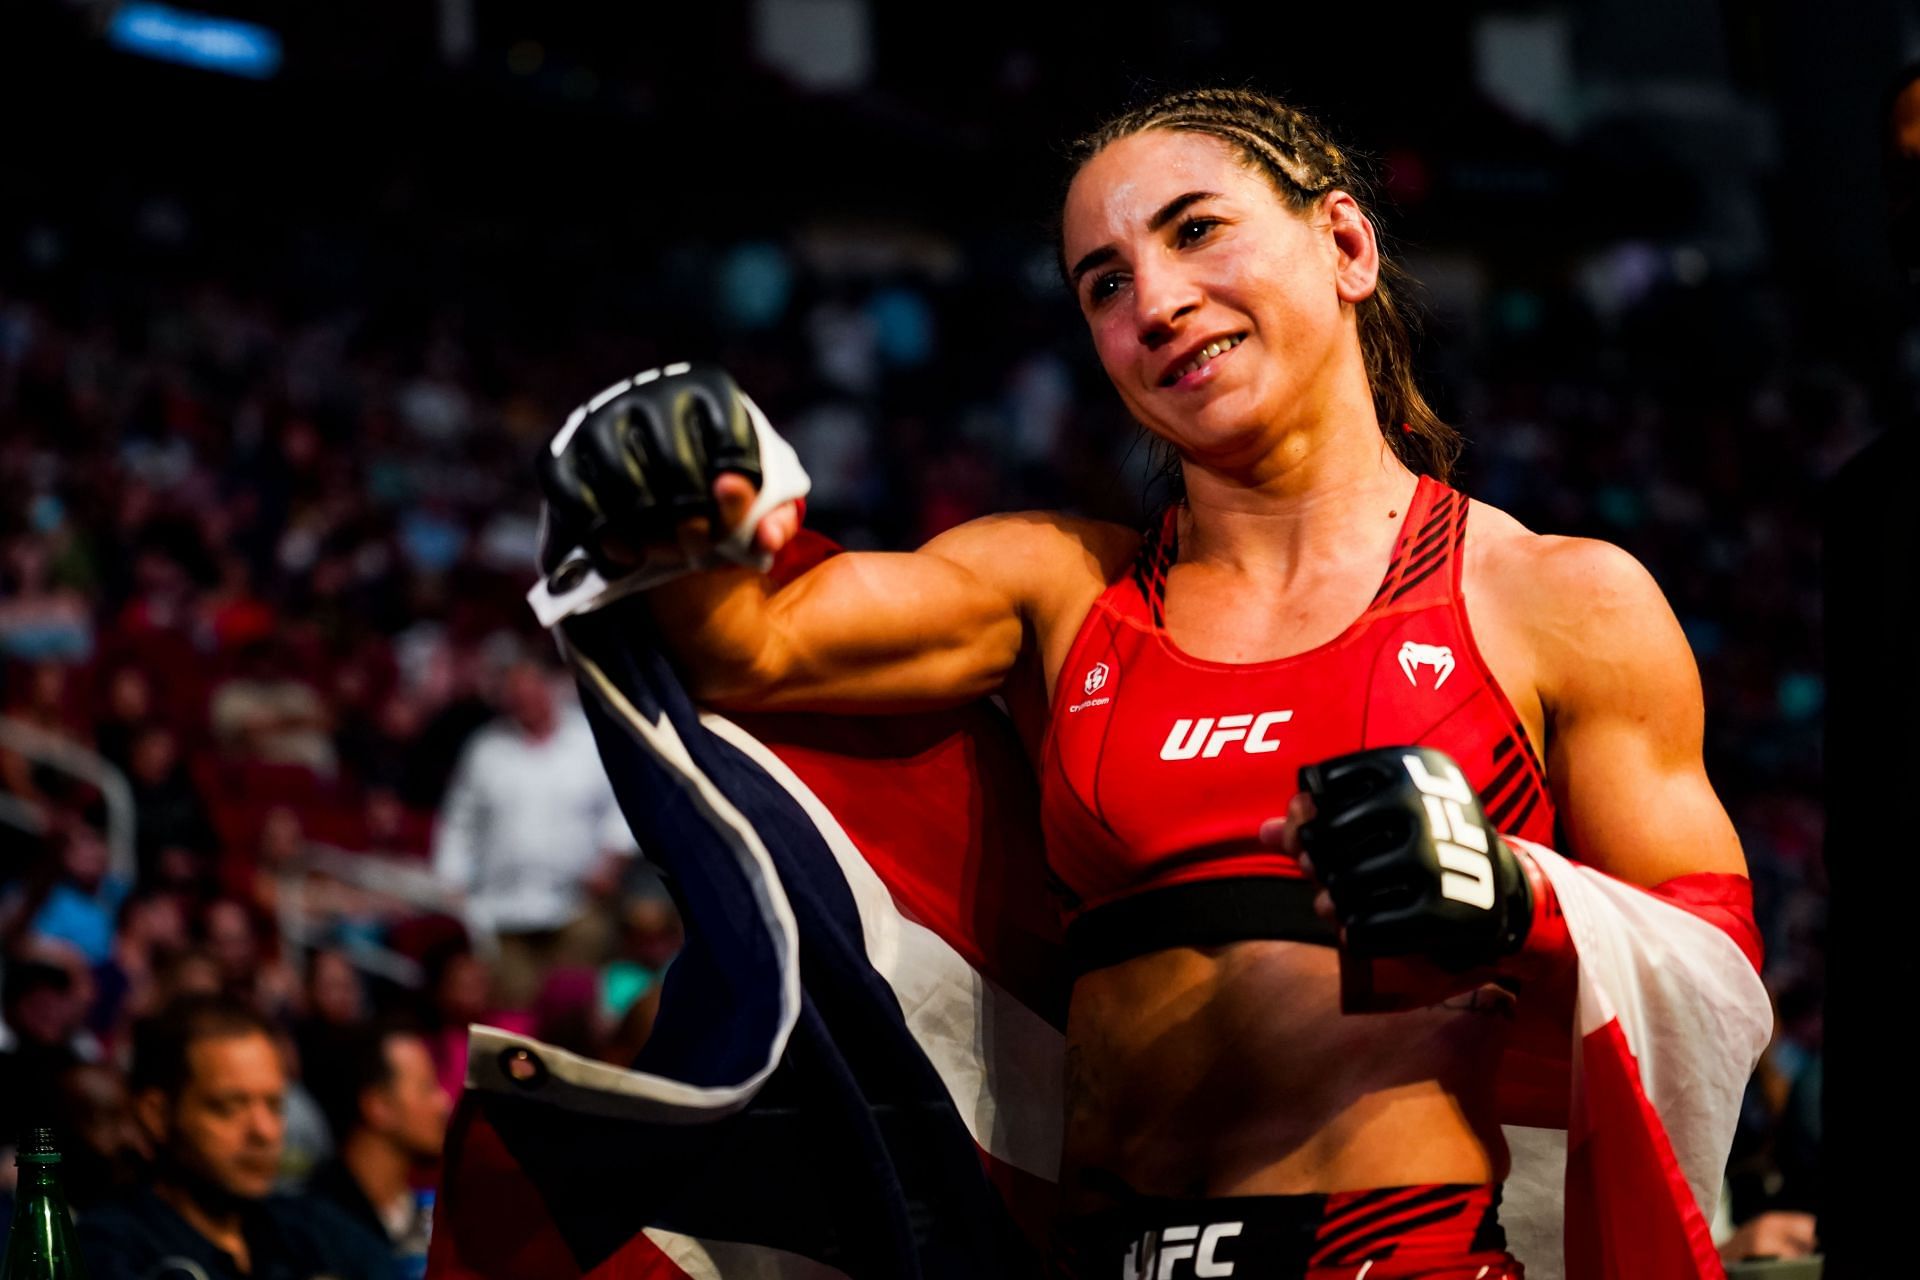 Tecia Torres has won three of her last four fights